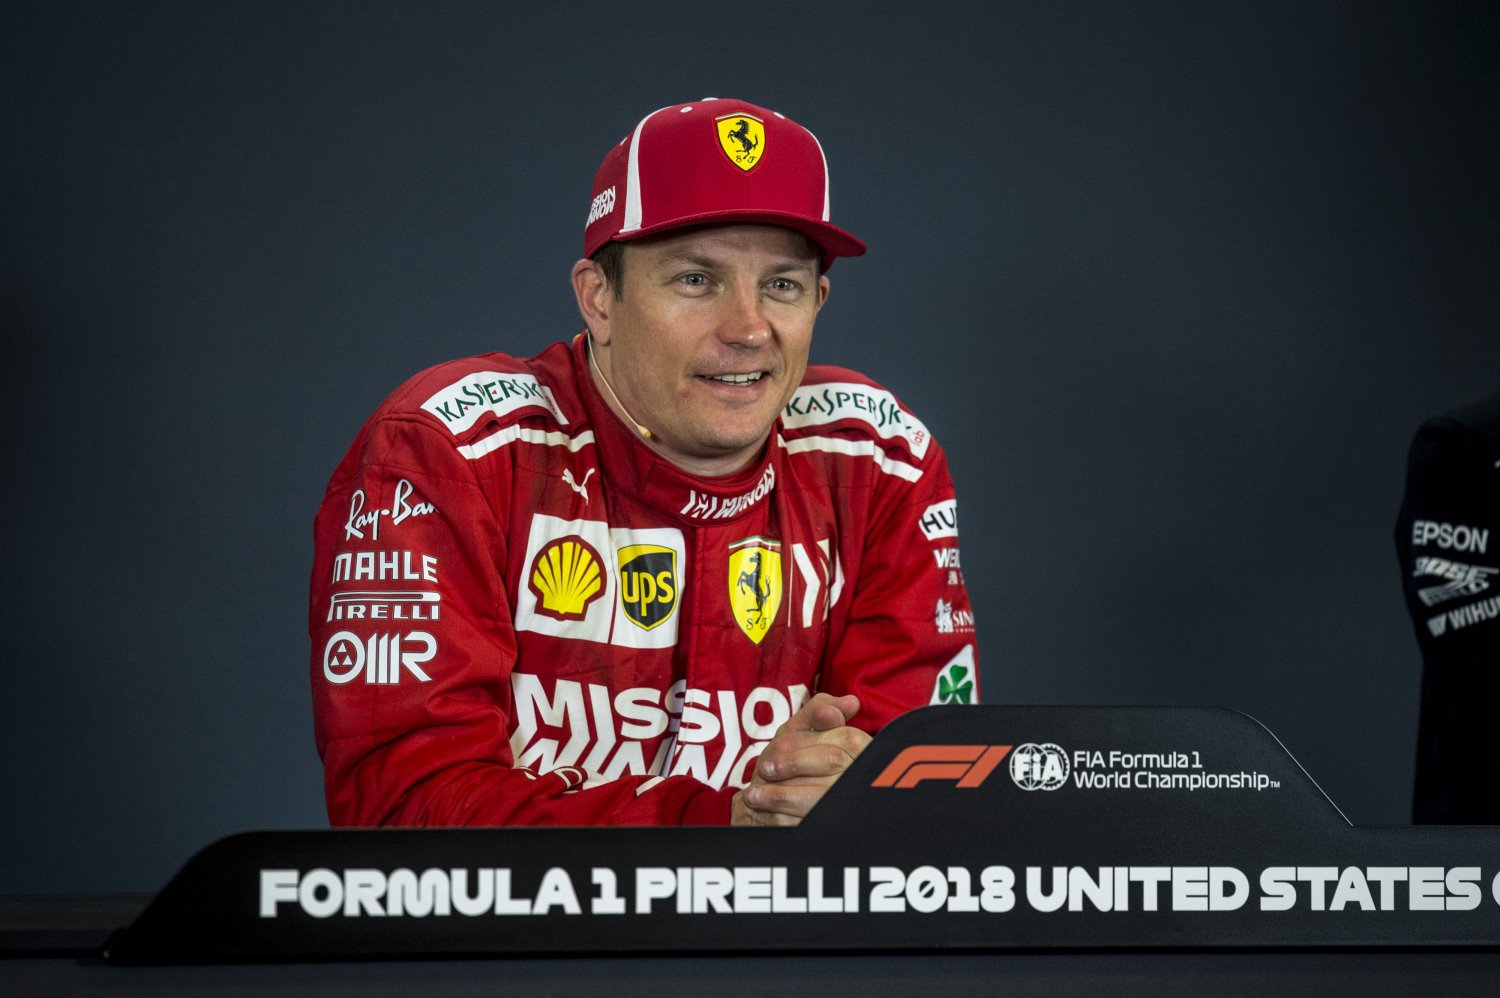 In the post-race press conference Raikkonen said he is happy the Sauber shop is so close to home